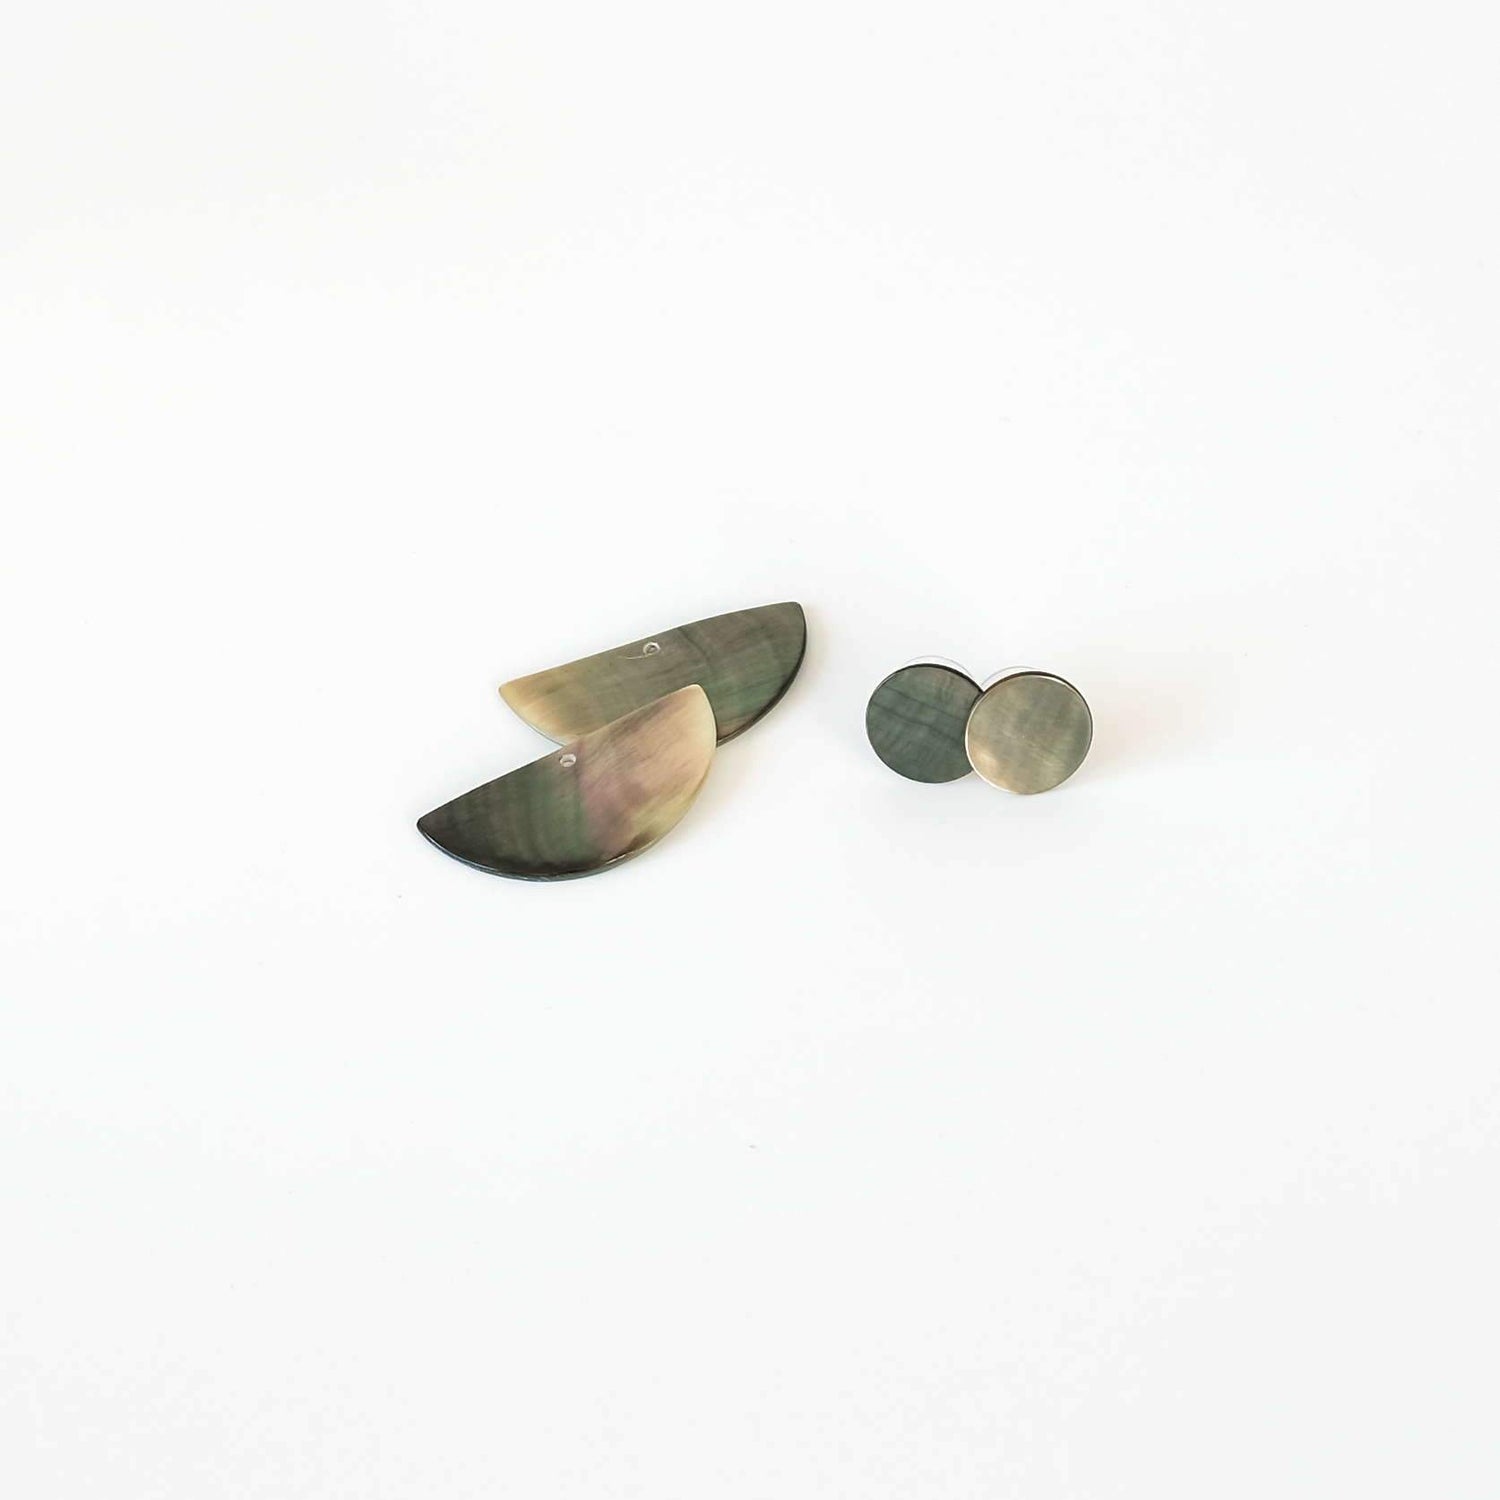 Jewelry - 3-in-1 Iridescent Grey Circle and Halfmoon Geometric Studs - Mother of Pearl Earrings | LIKHÂ - LIKHÂ